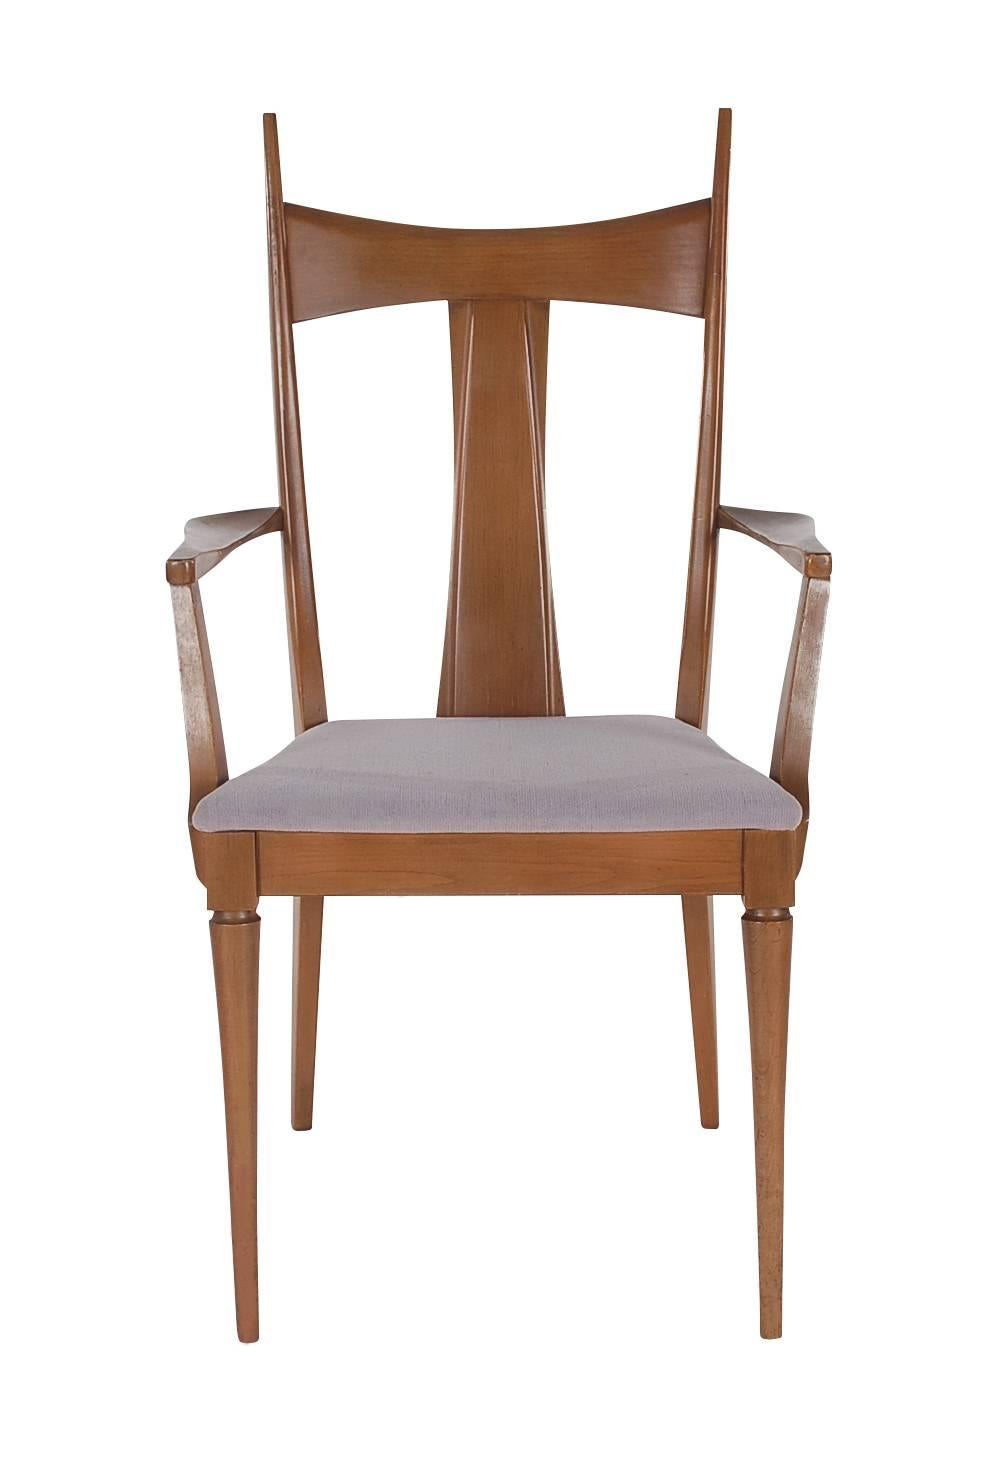 American Mid-Century Modern Walnut Dining Chairs after Paul McCobb or Gio Ponti For Sale